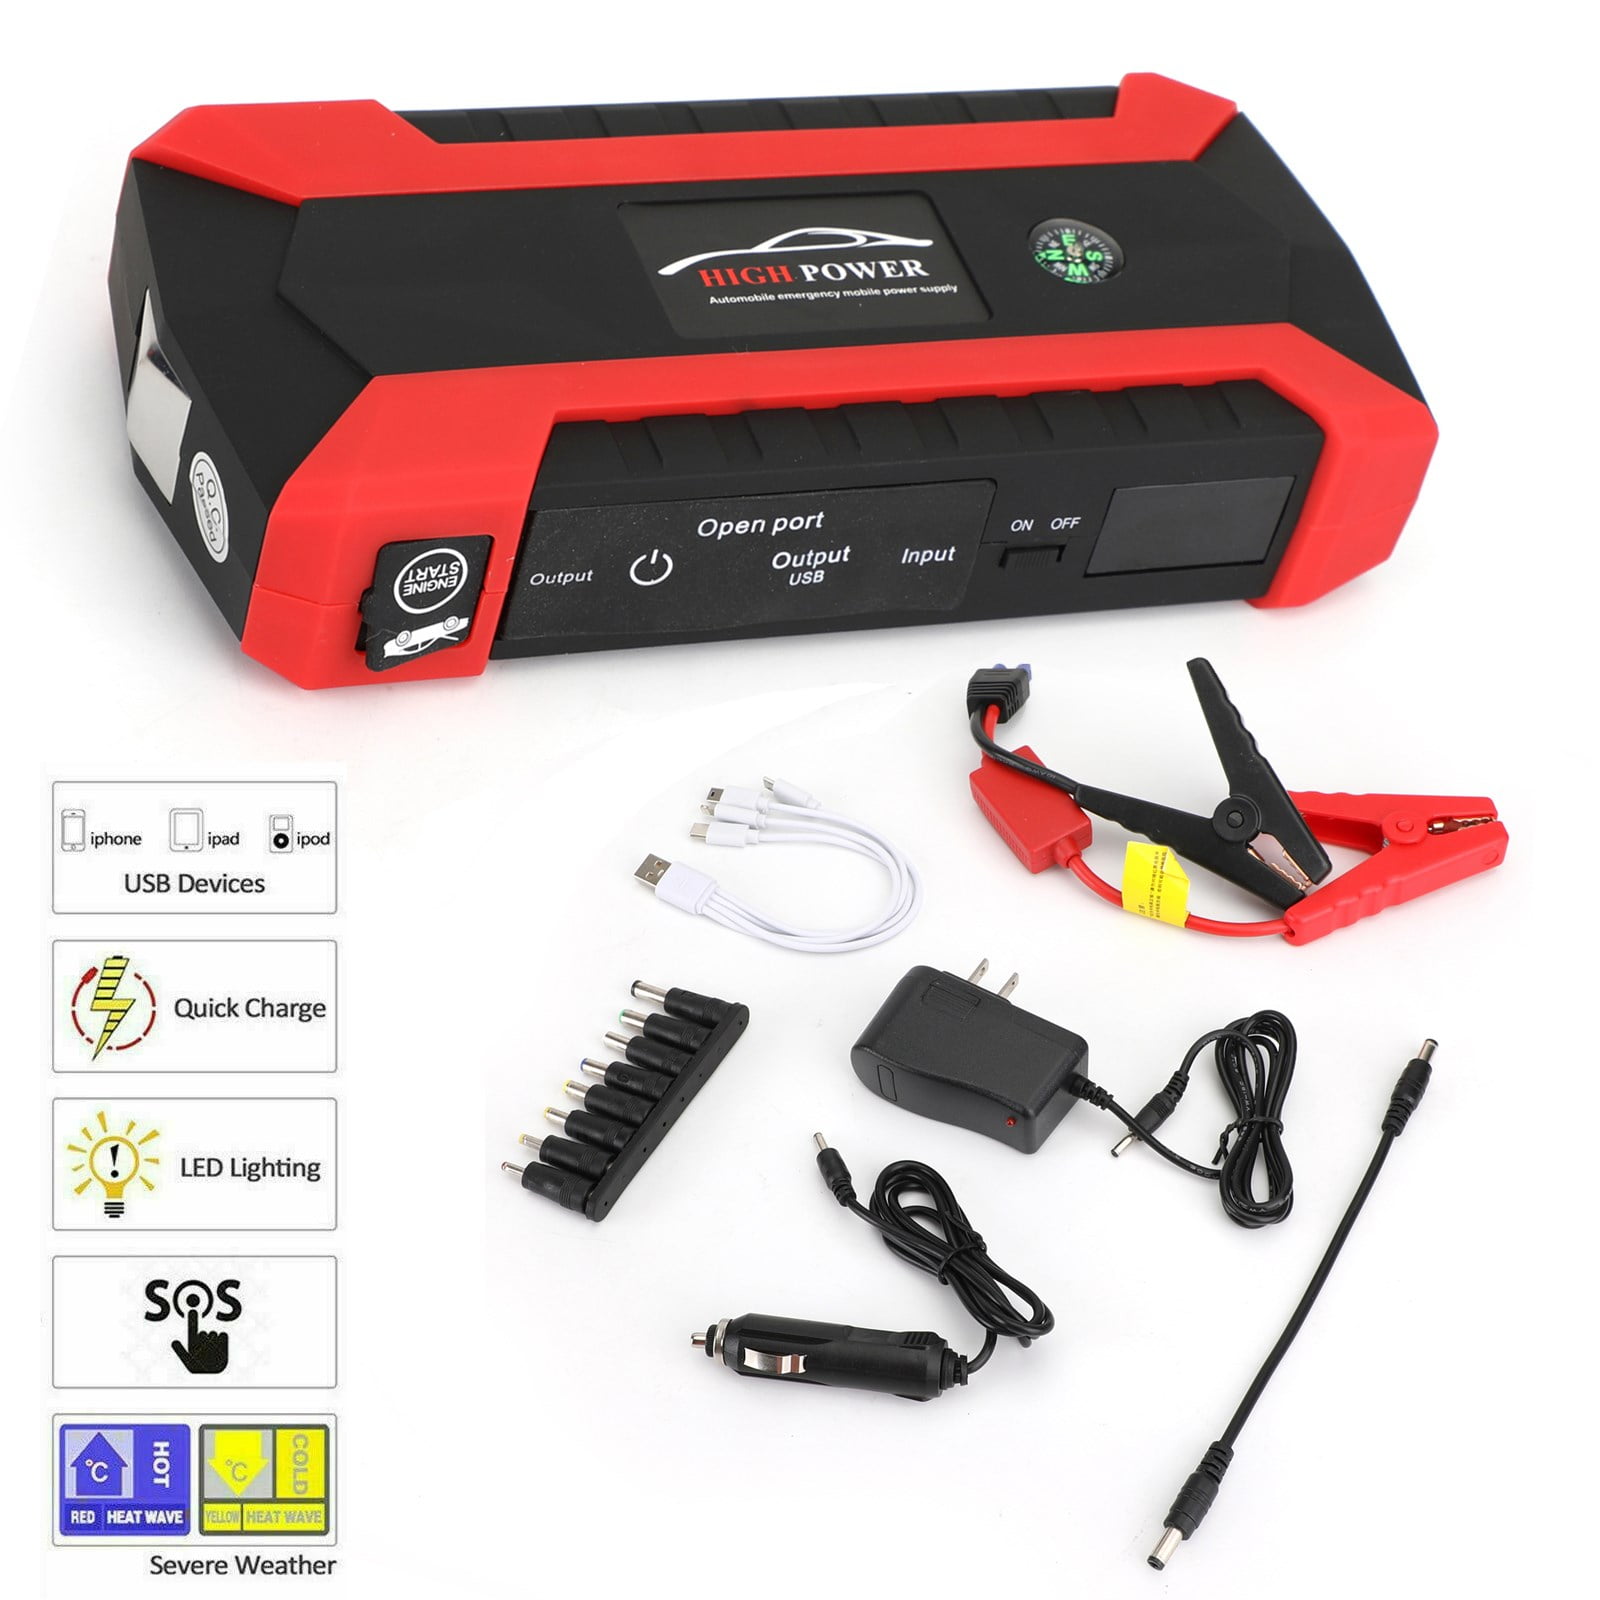 12V 89800mAh Car Jump Starter Kit Booster LCD 4 USB Charger Battery Power Bank, Size: 4 in